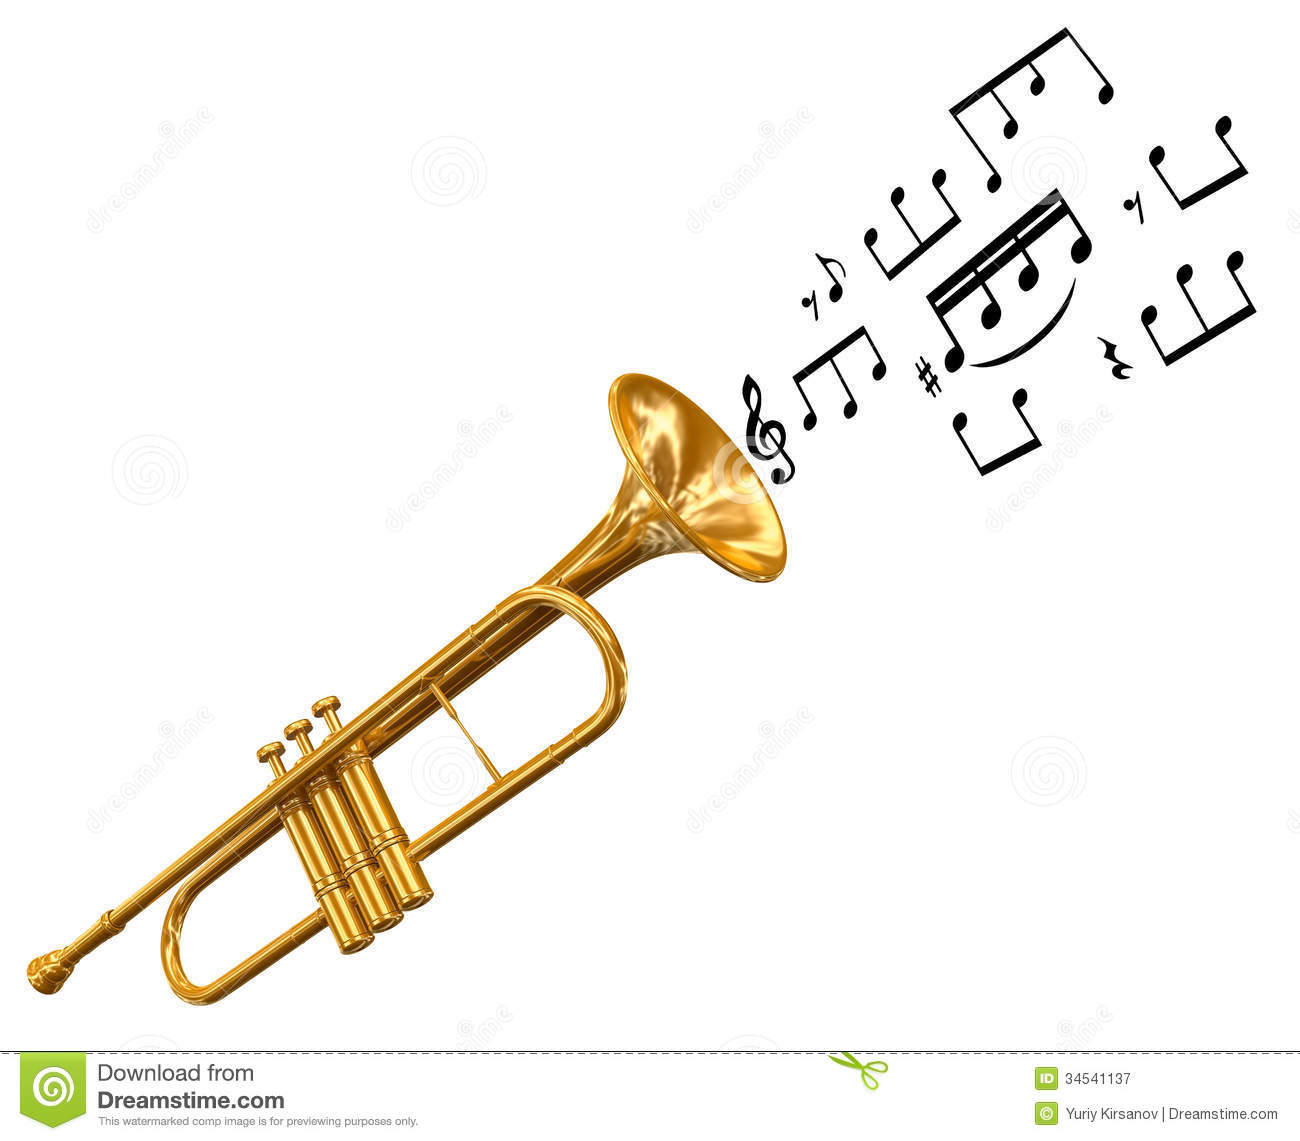 Trumpet With Music Notes  Clipping Path Included  Royalty Free Stock    